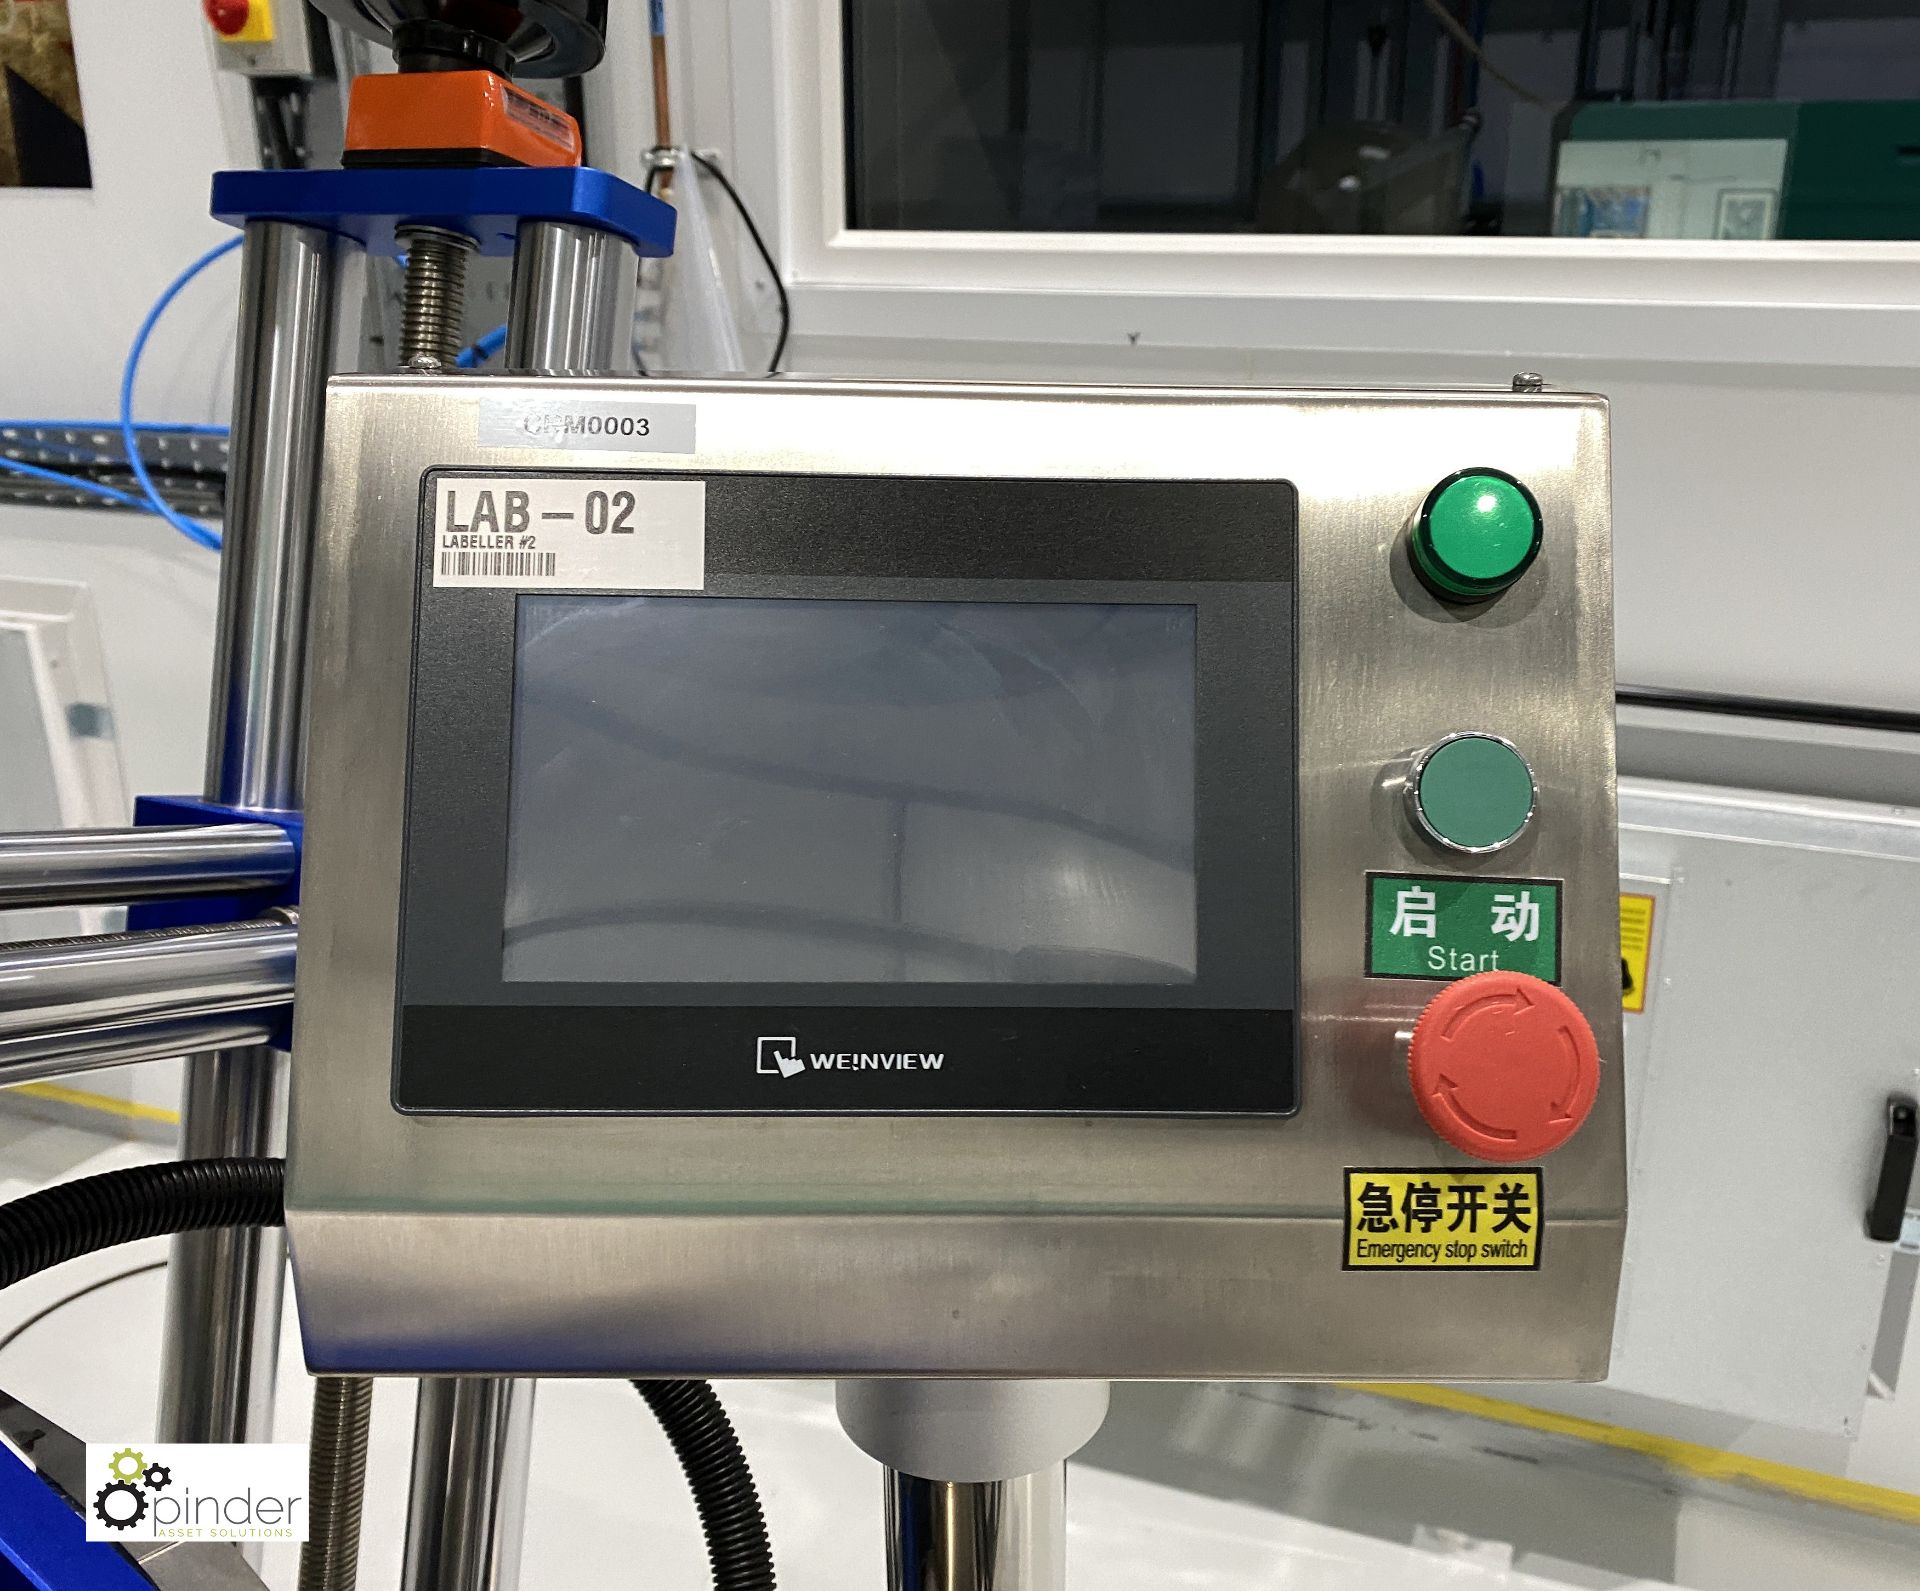 Brightwin Packaging Machinery Co Ltd BWL stainless steel Labeller for use applying labels to - Image 5 of 10